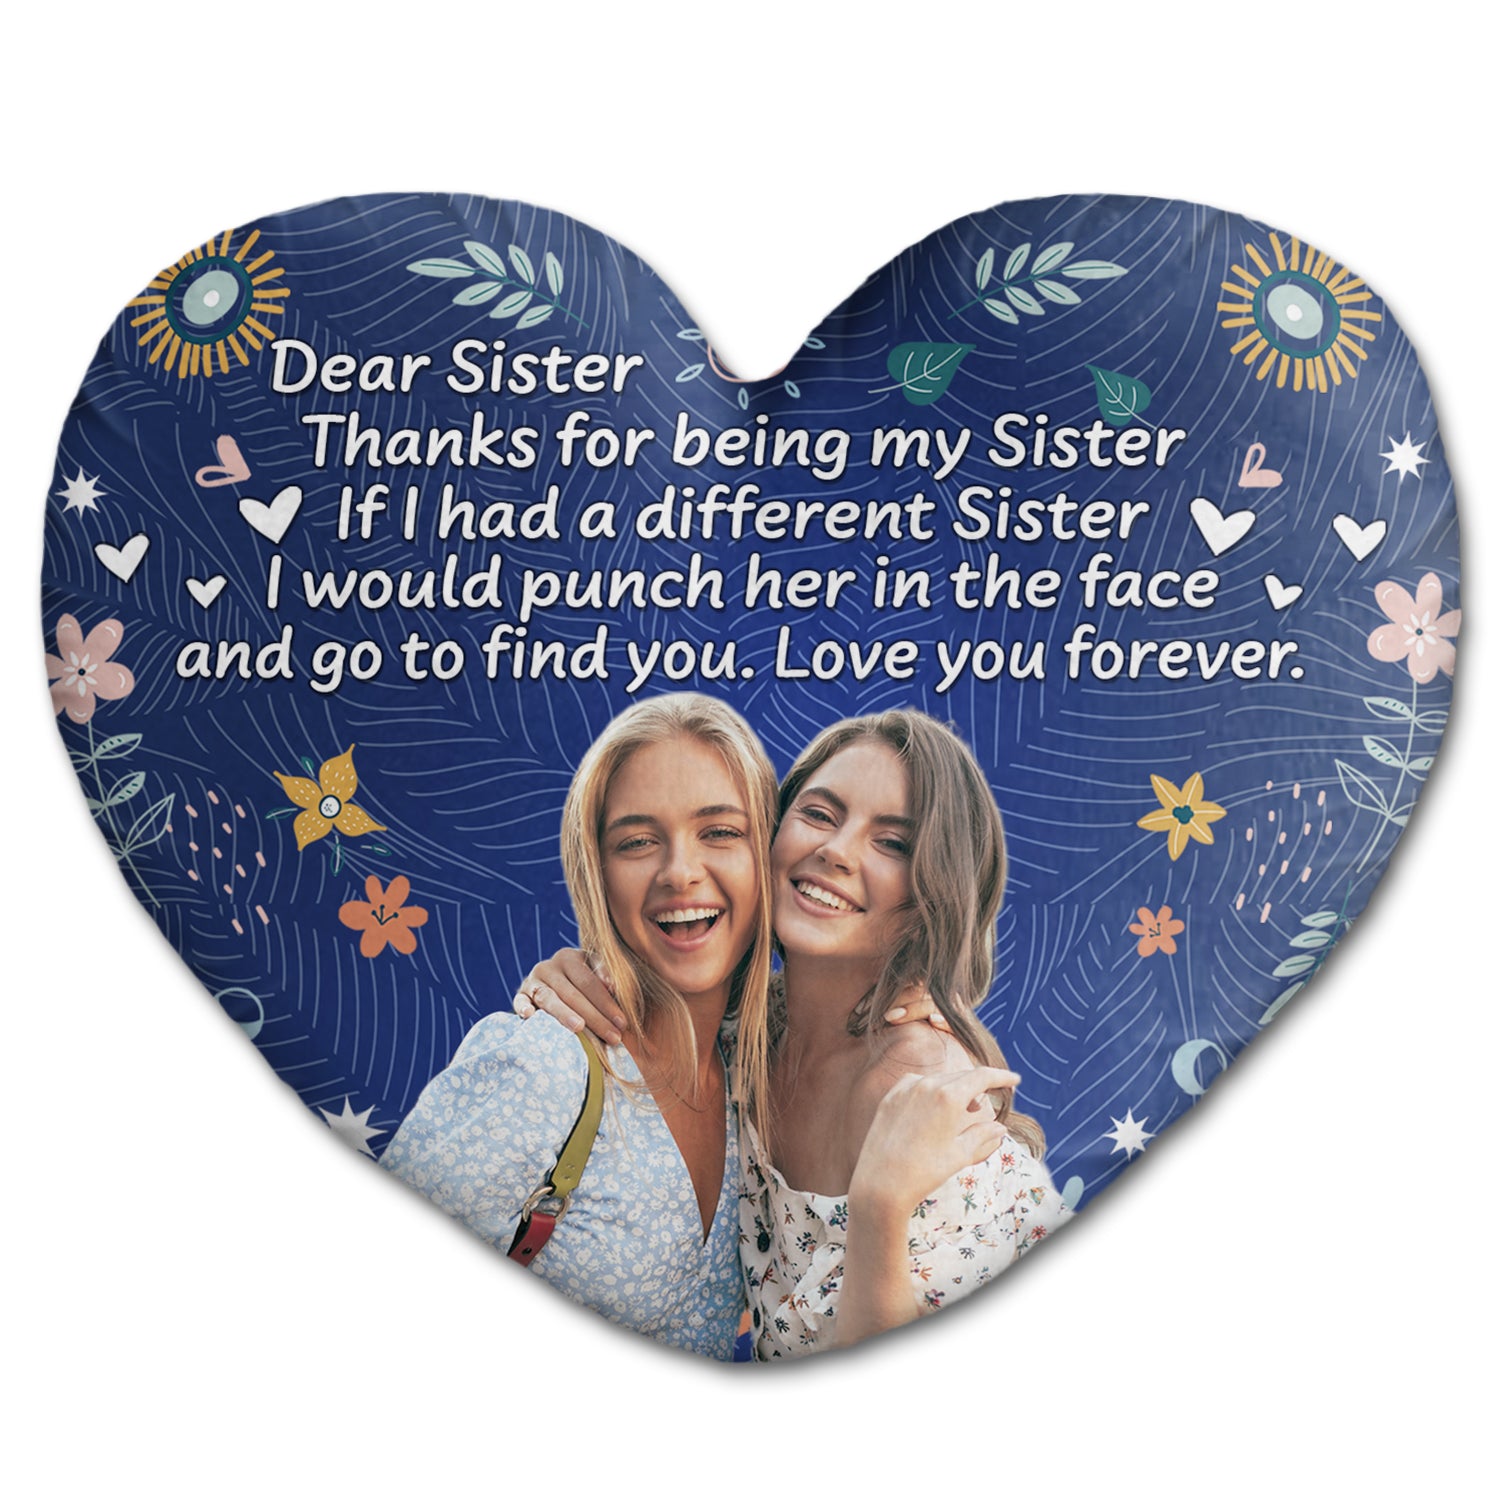 Custom Photo Thanks For Being My Sister - Gift For Sisters, Siblings, Friends - Personalized Heart Shaped Pillow